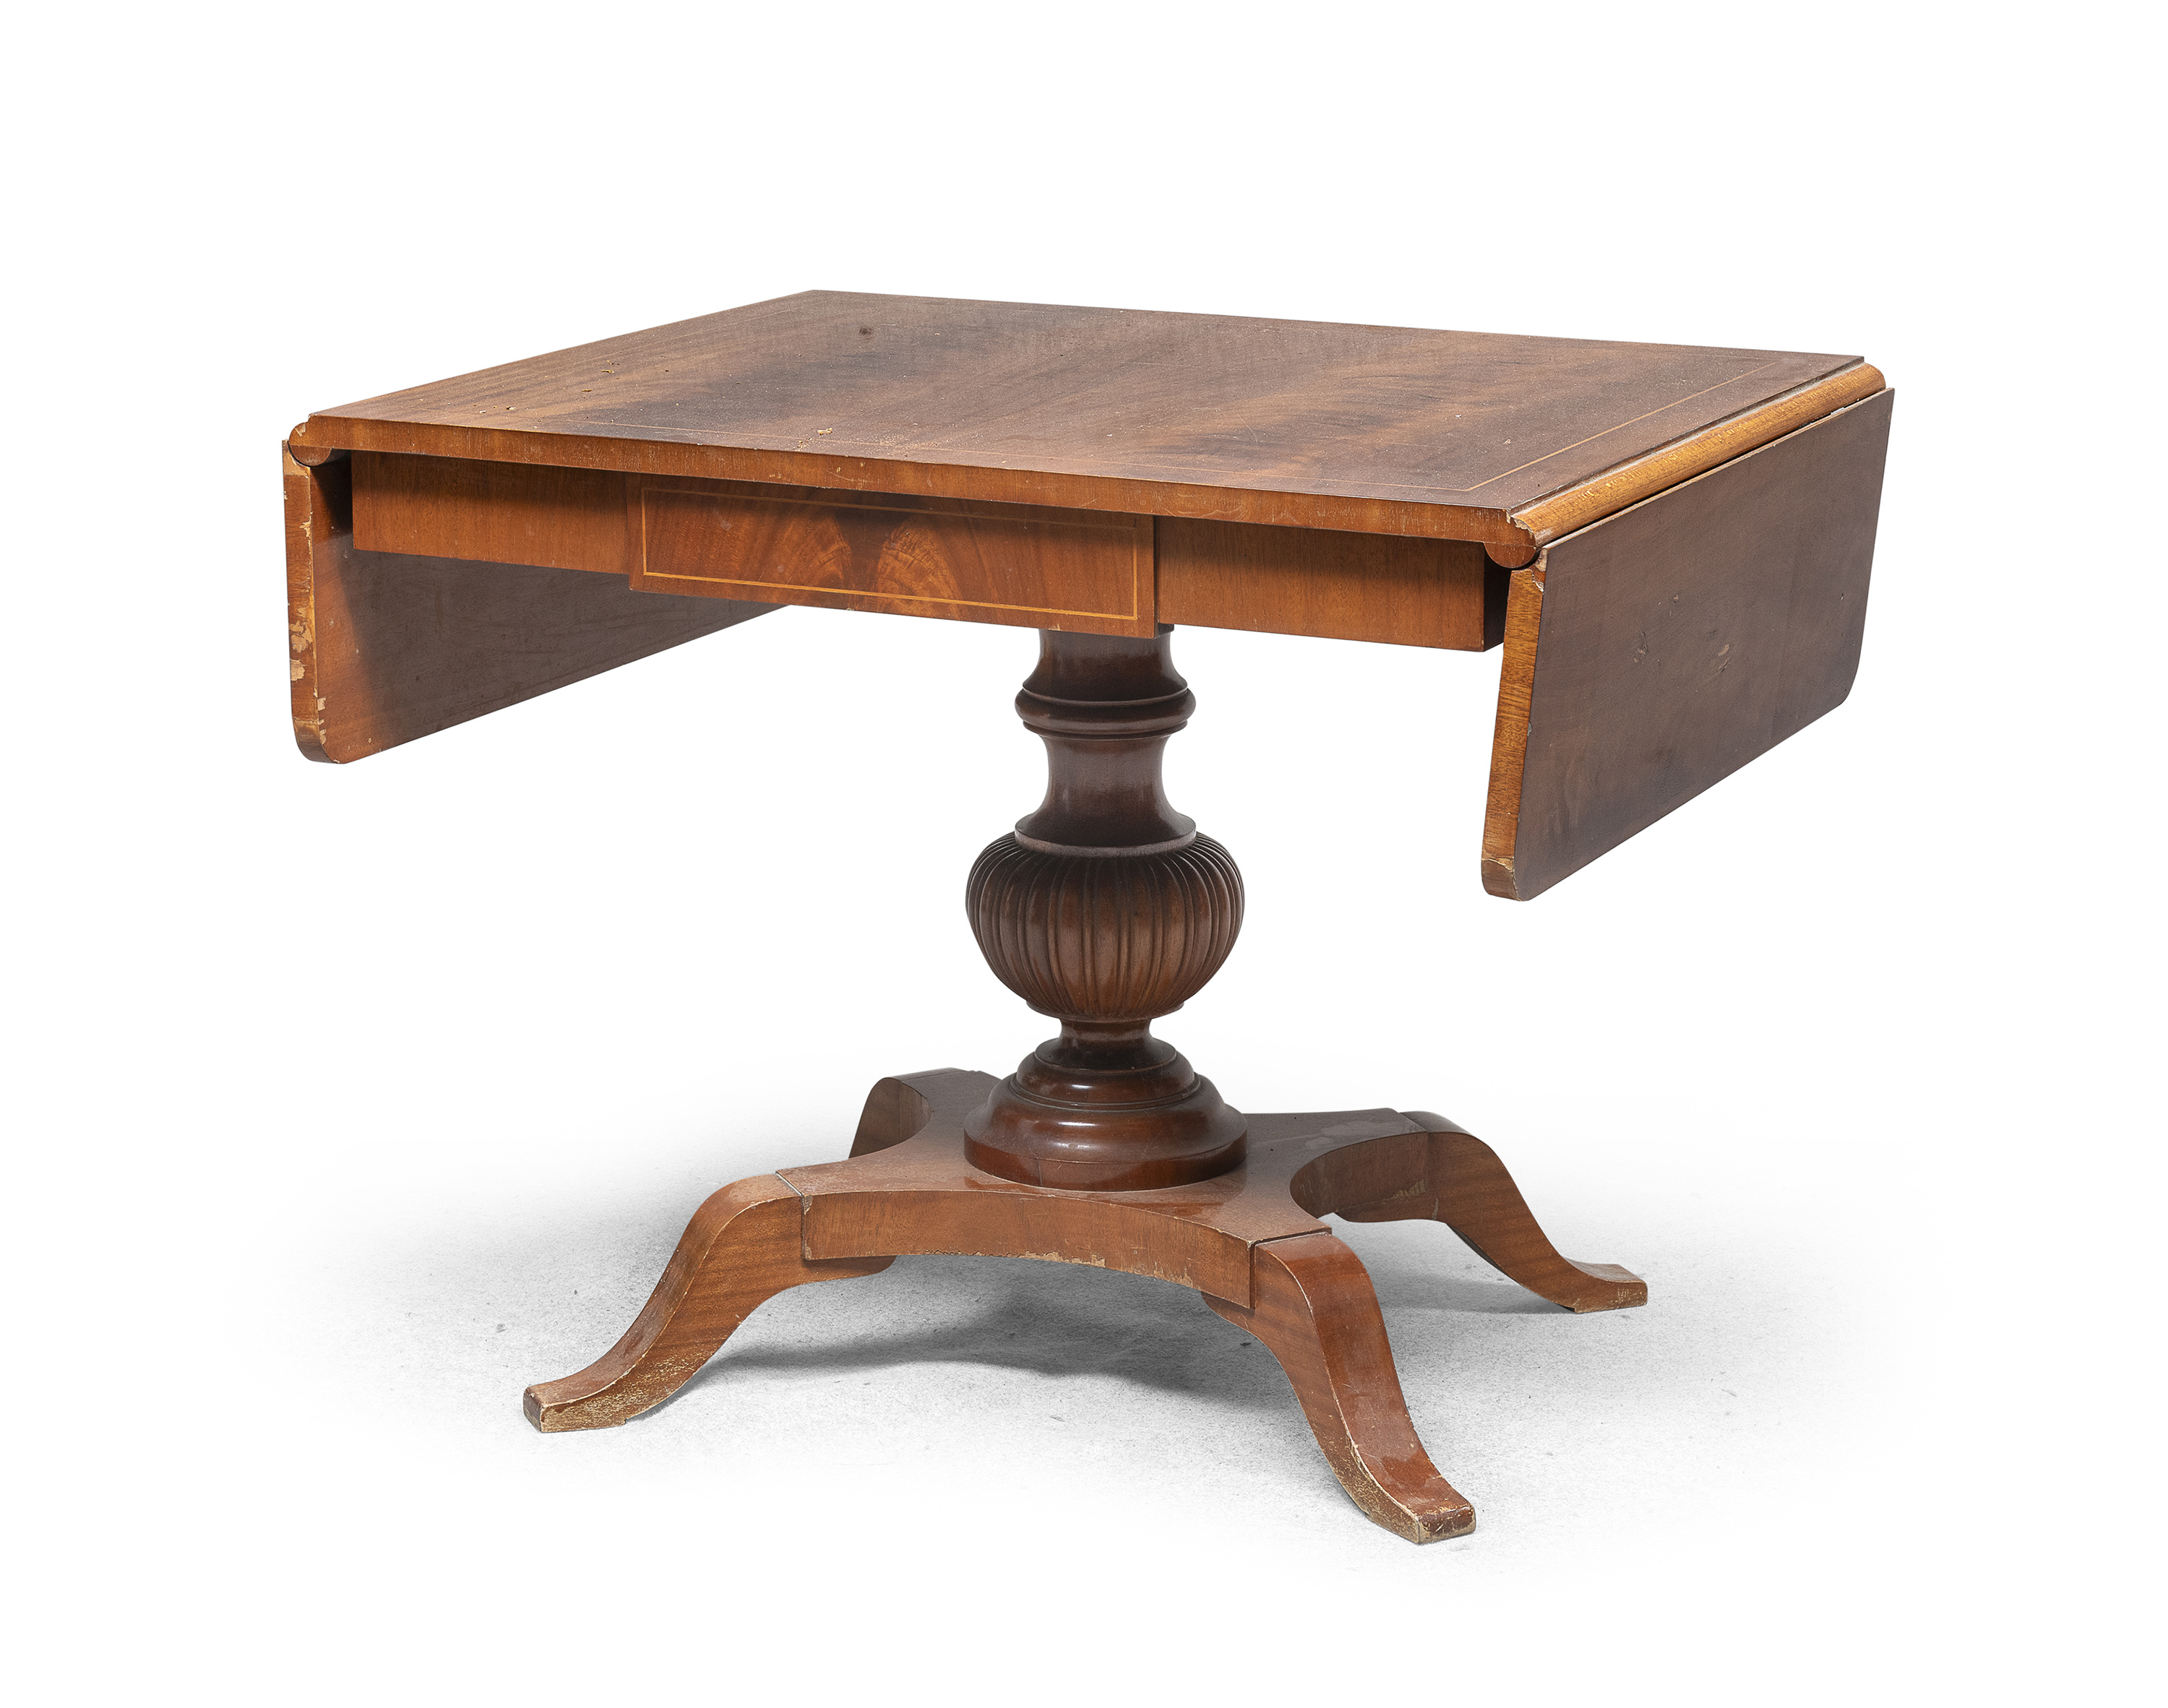 MAPLE DROP-LEAF TABLE END OF THE 19TH CENTURY